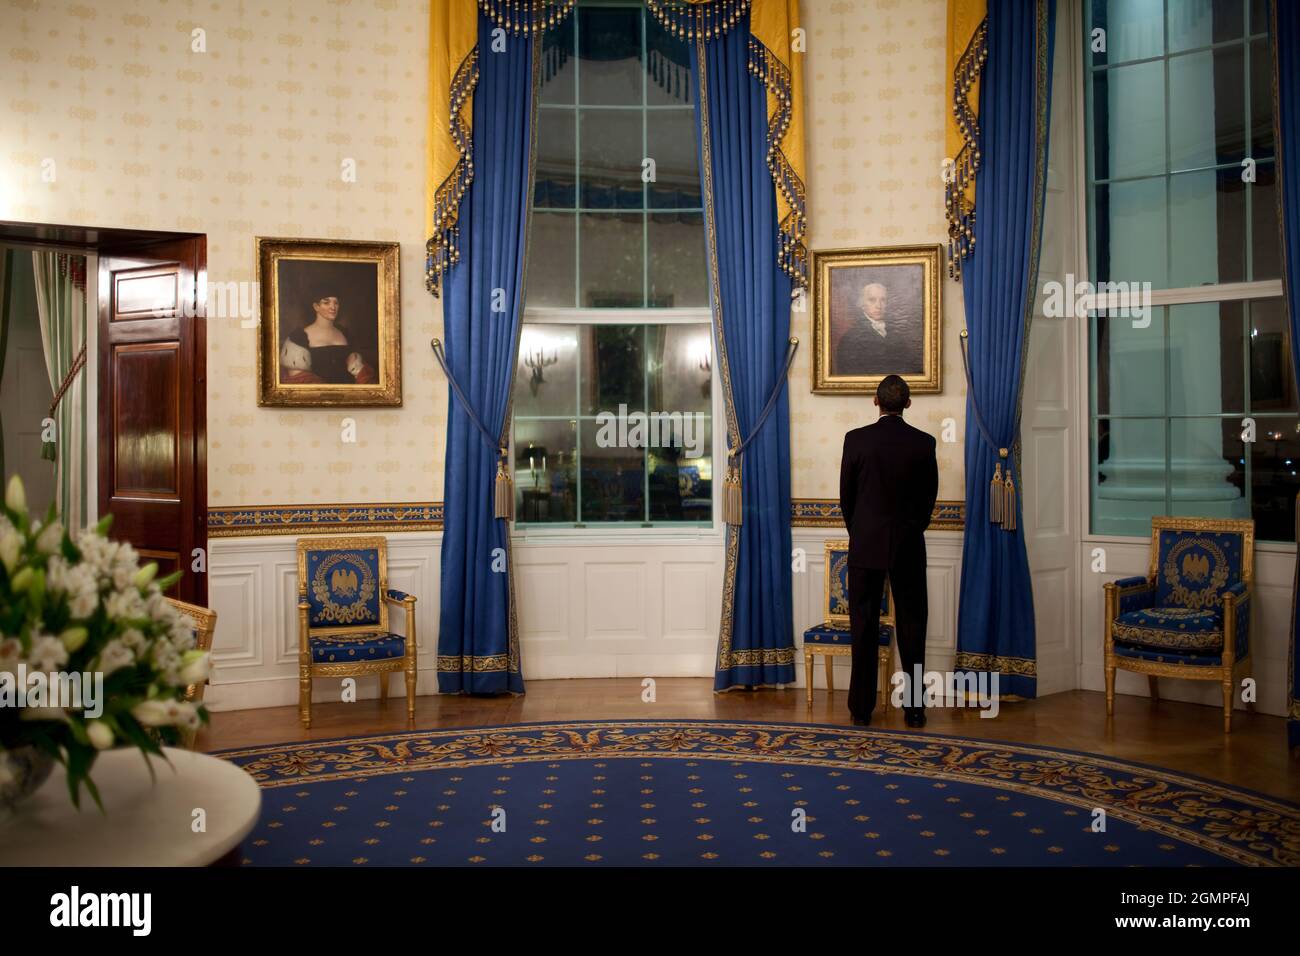 President Barack Obama looks at a portrait of President John Adams while waiting in the Blue Room prior to his press conference in the East Room 2/9/09.Official White House Photo by Pete Souza Stock Photo